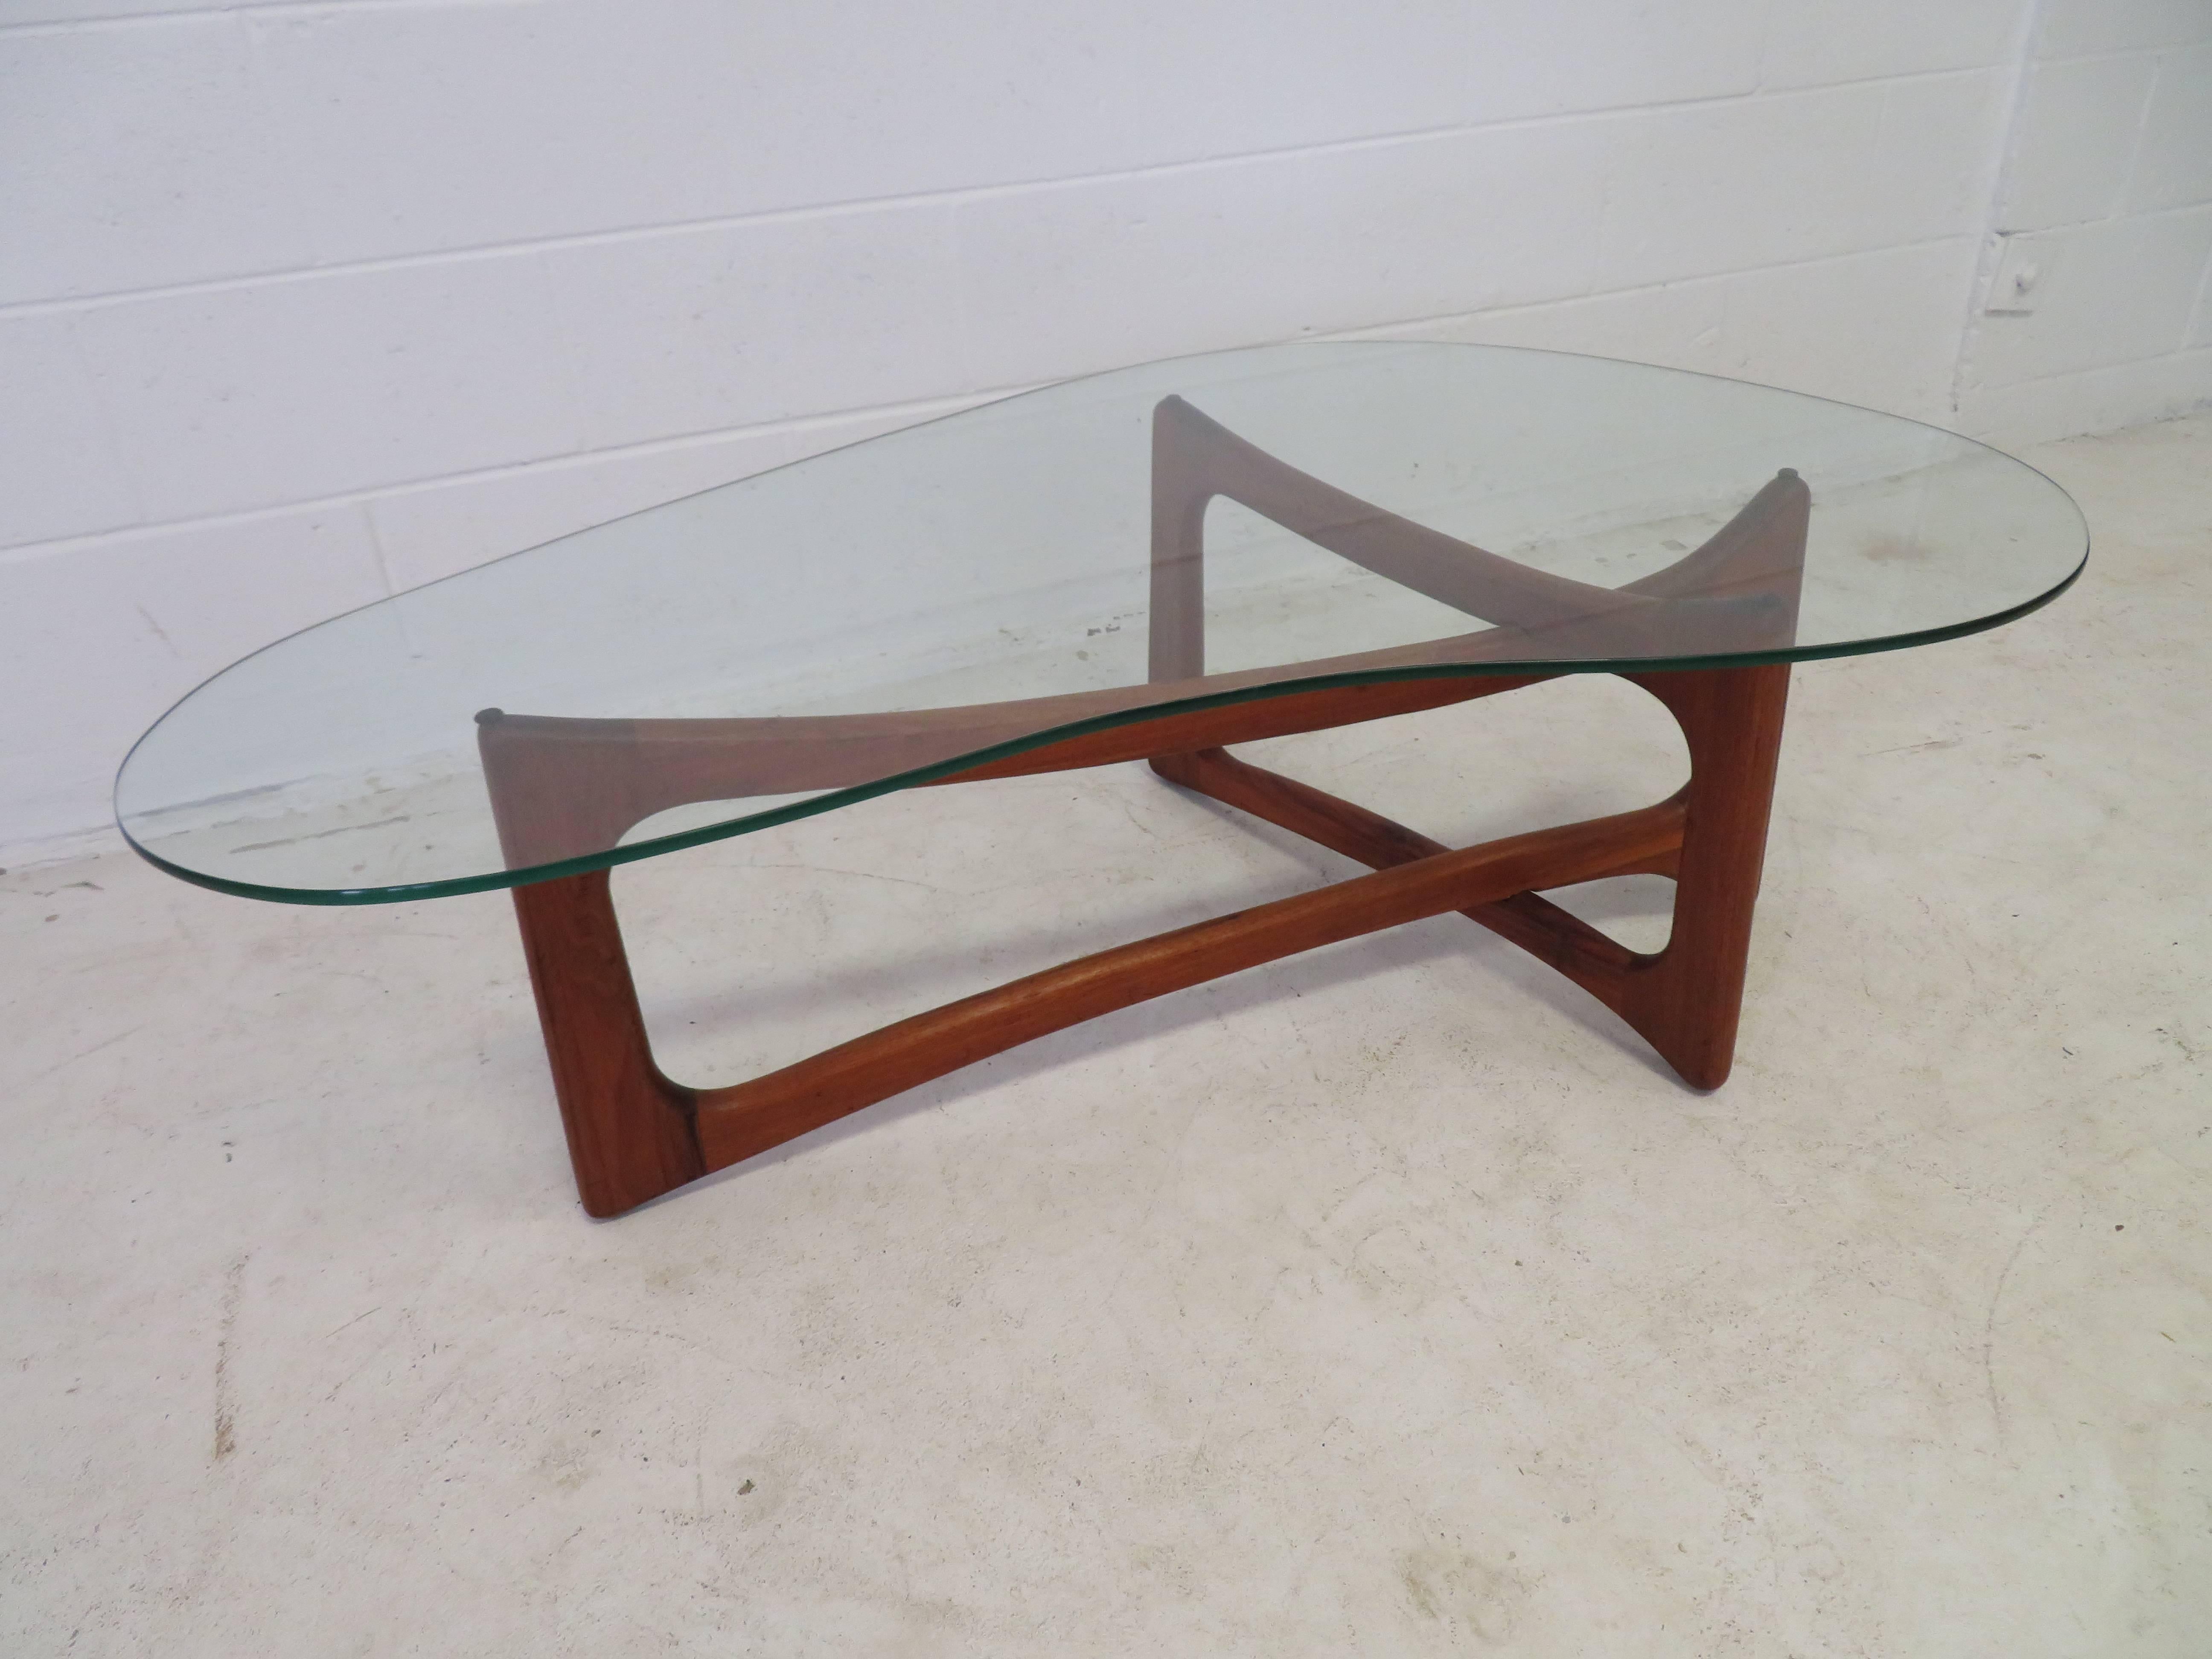 Wonderful and iconic Adrian Pearsall sculptural walnut coffee table. This is a Fine example of this amazingly designed table. The Fine crafted walnut base has a oil rubbed finish that is original. I love the original finish, the wood seems a bit